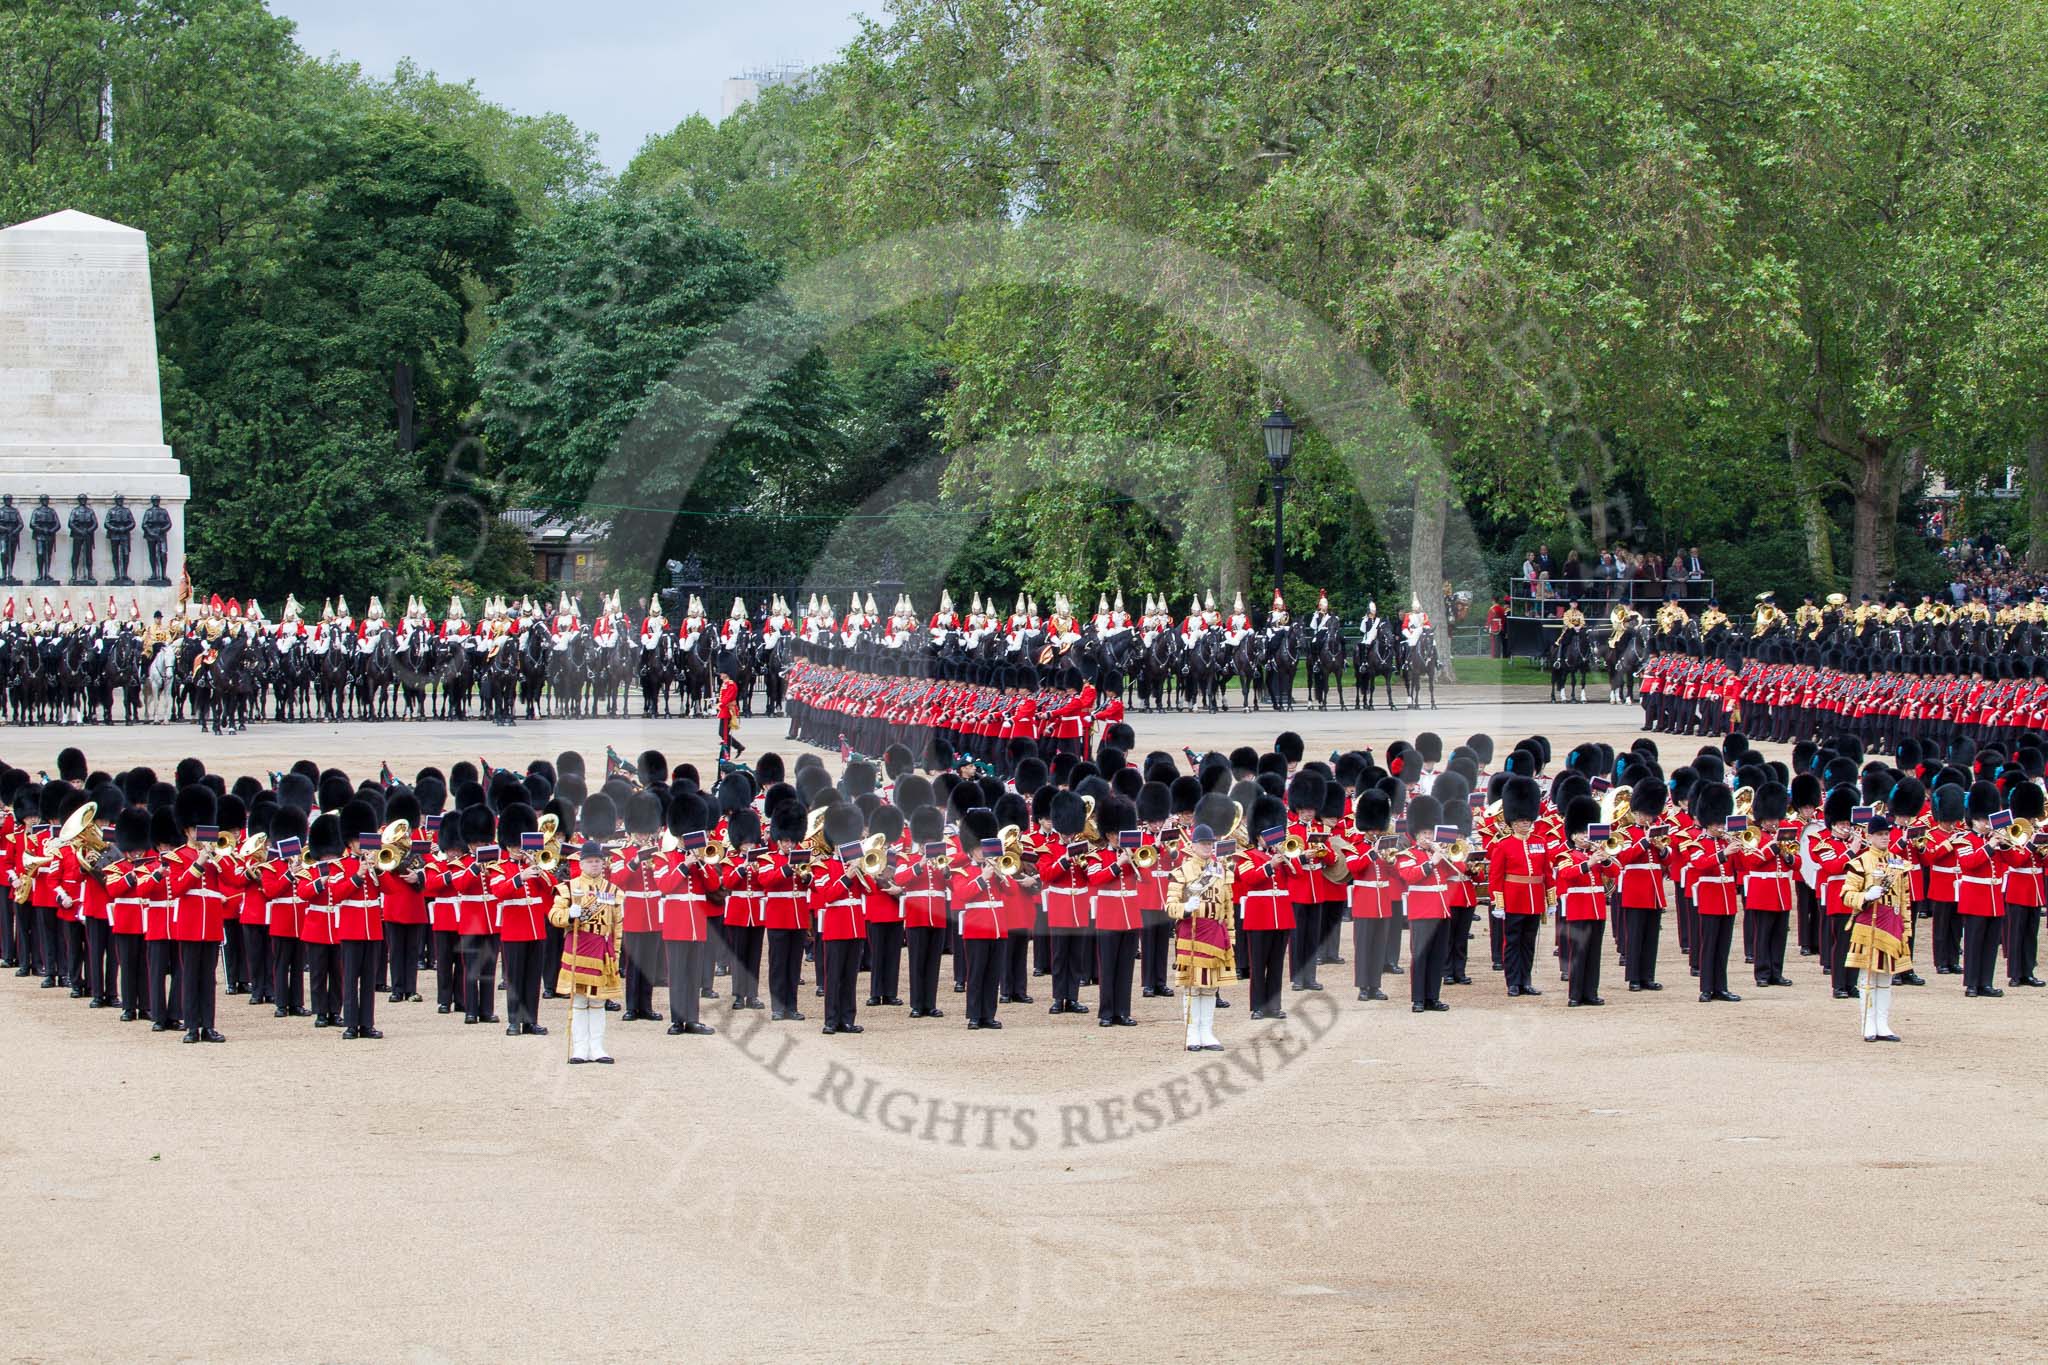 Trooping the Colour 2012: The March Past: No. 2 Guard, 1st Battalion Coldstream Guards,and No. 3 Guard, No. 7 Company, Coldstream Guard, marching between the Household Cavalry on the St.  James's Park side of Horse Guards Parade, and the Massed Bands in the centre..
Horse Guards Parade, Westminster,
London SW1,

United Kingdom,
on 16 June 2012 at 11:42, image #470